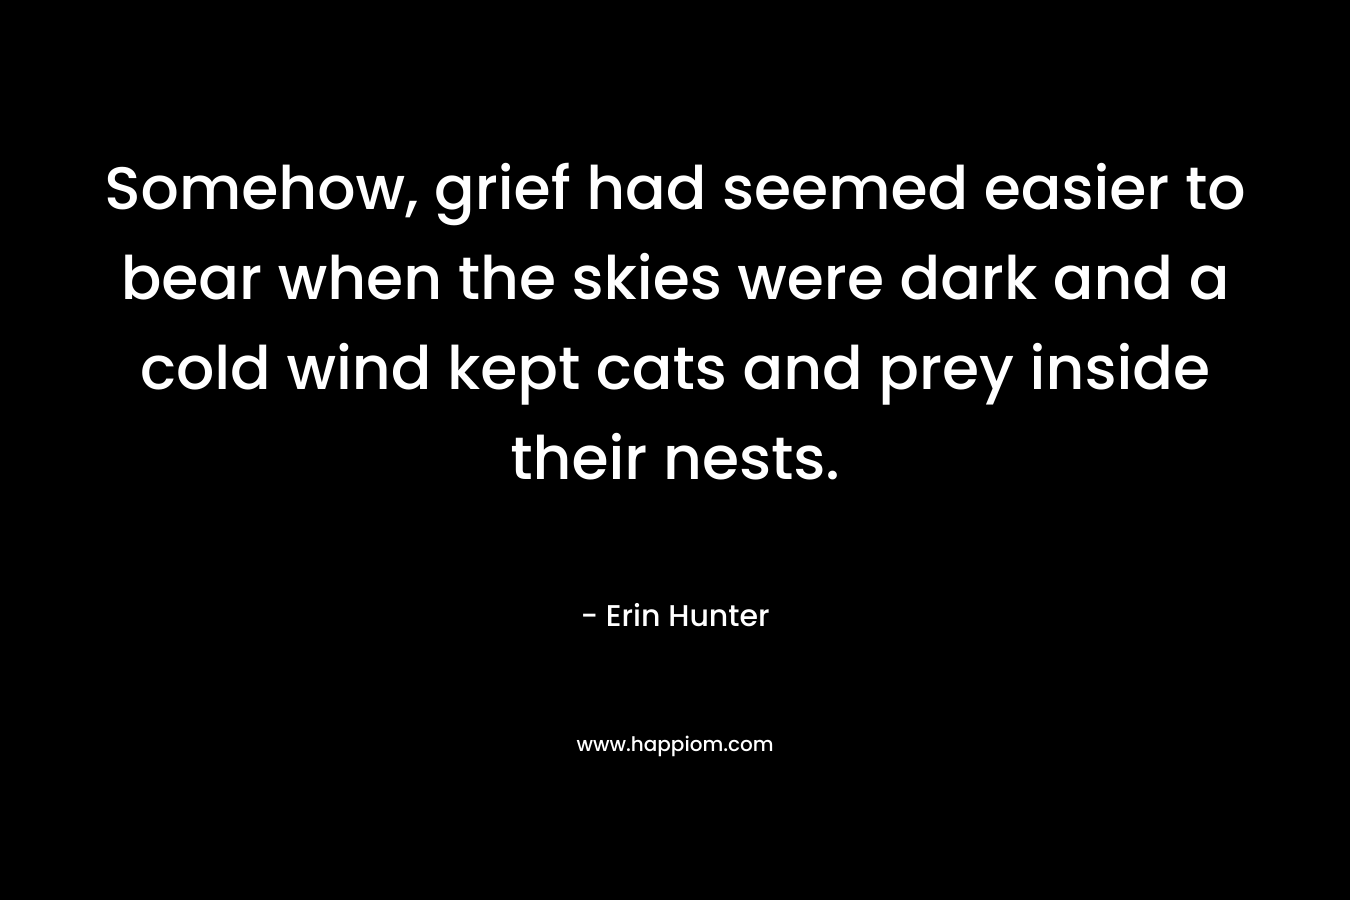 Somehow, grief had seemed easier to bear when the skies were dark and a cold wind kept cats and prey inside their nests. – Erin Hunter